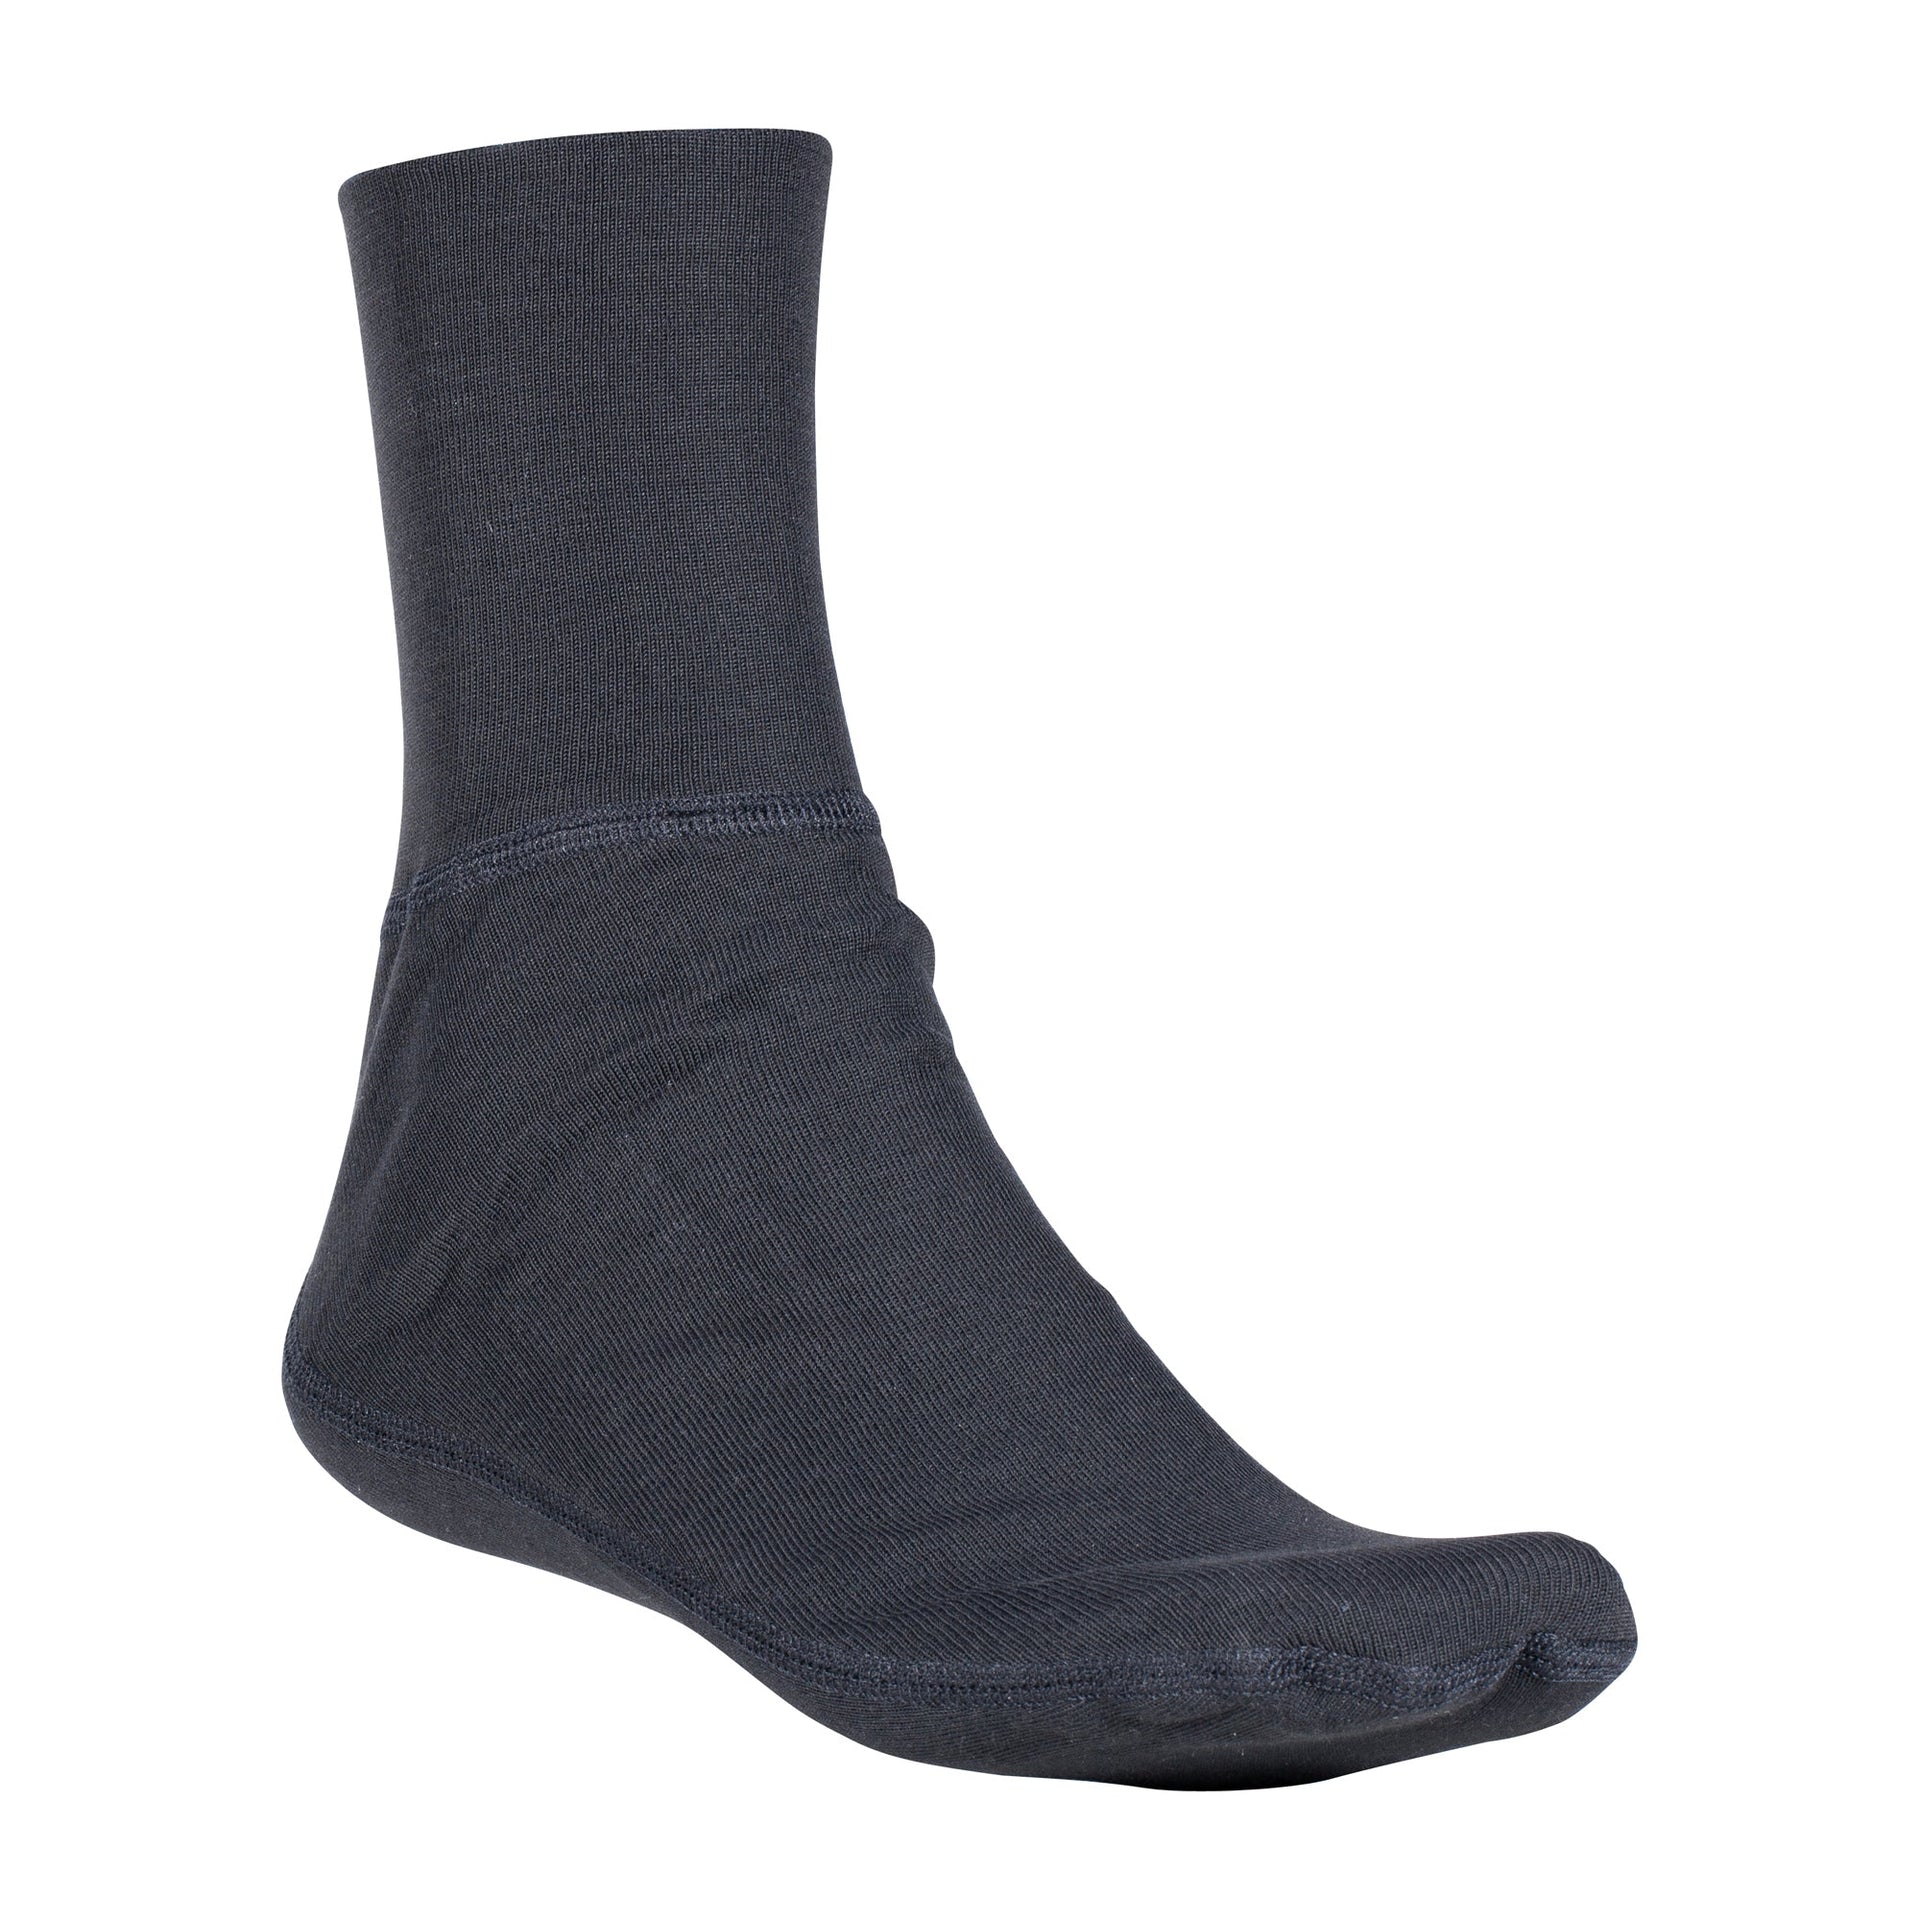 Chaussettes Super Thermo Super Sock s